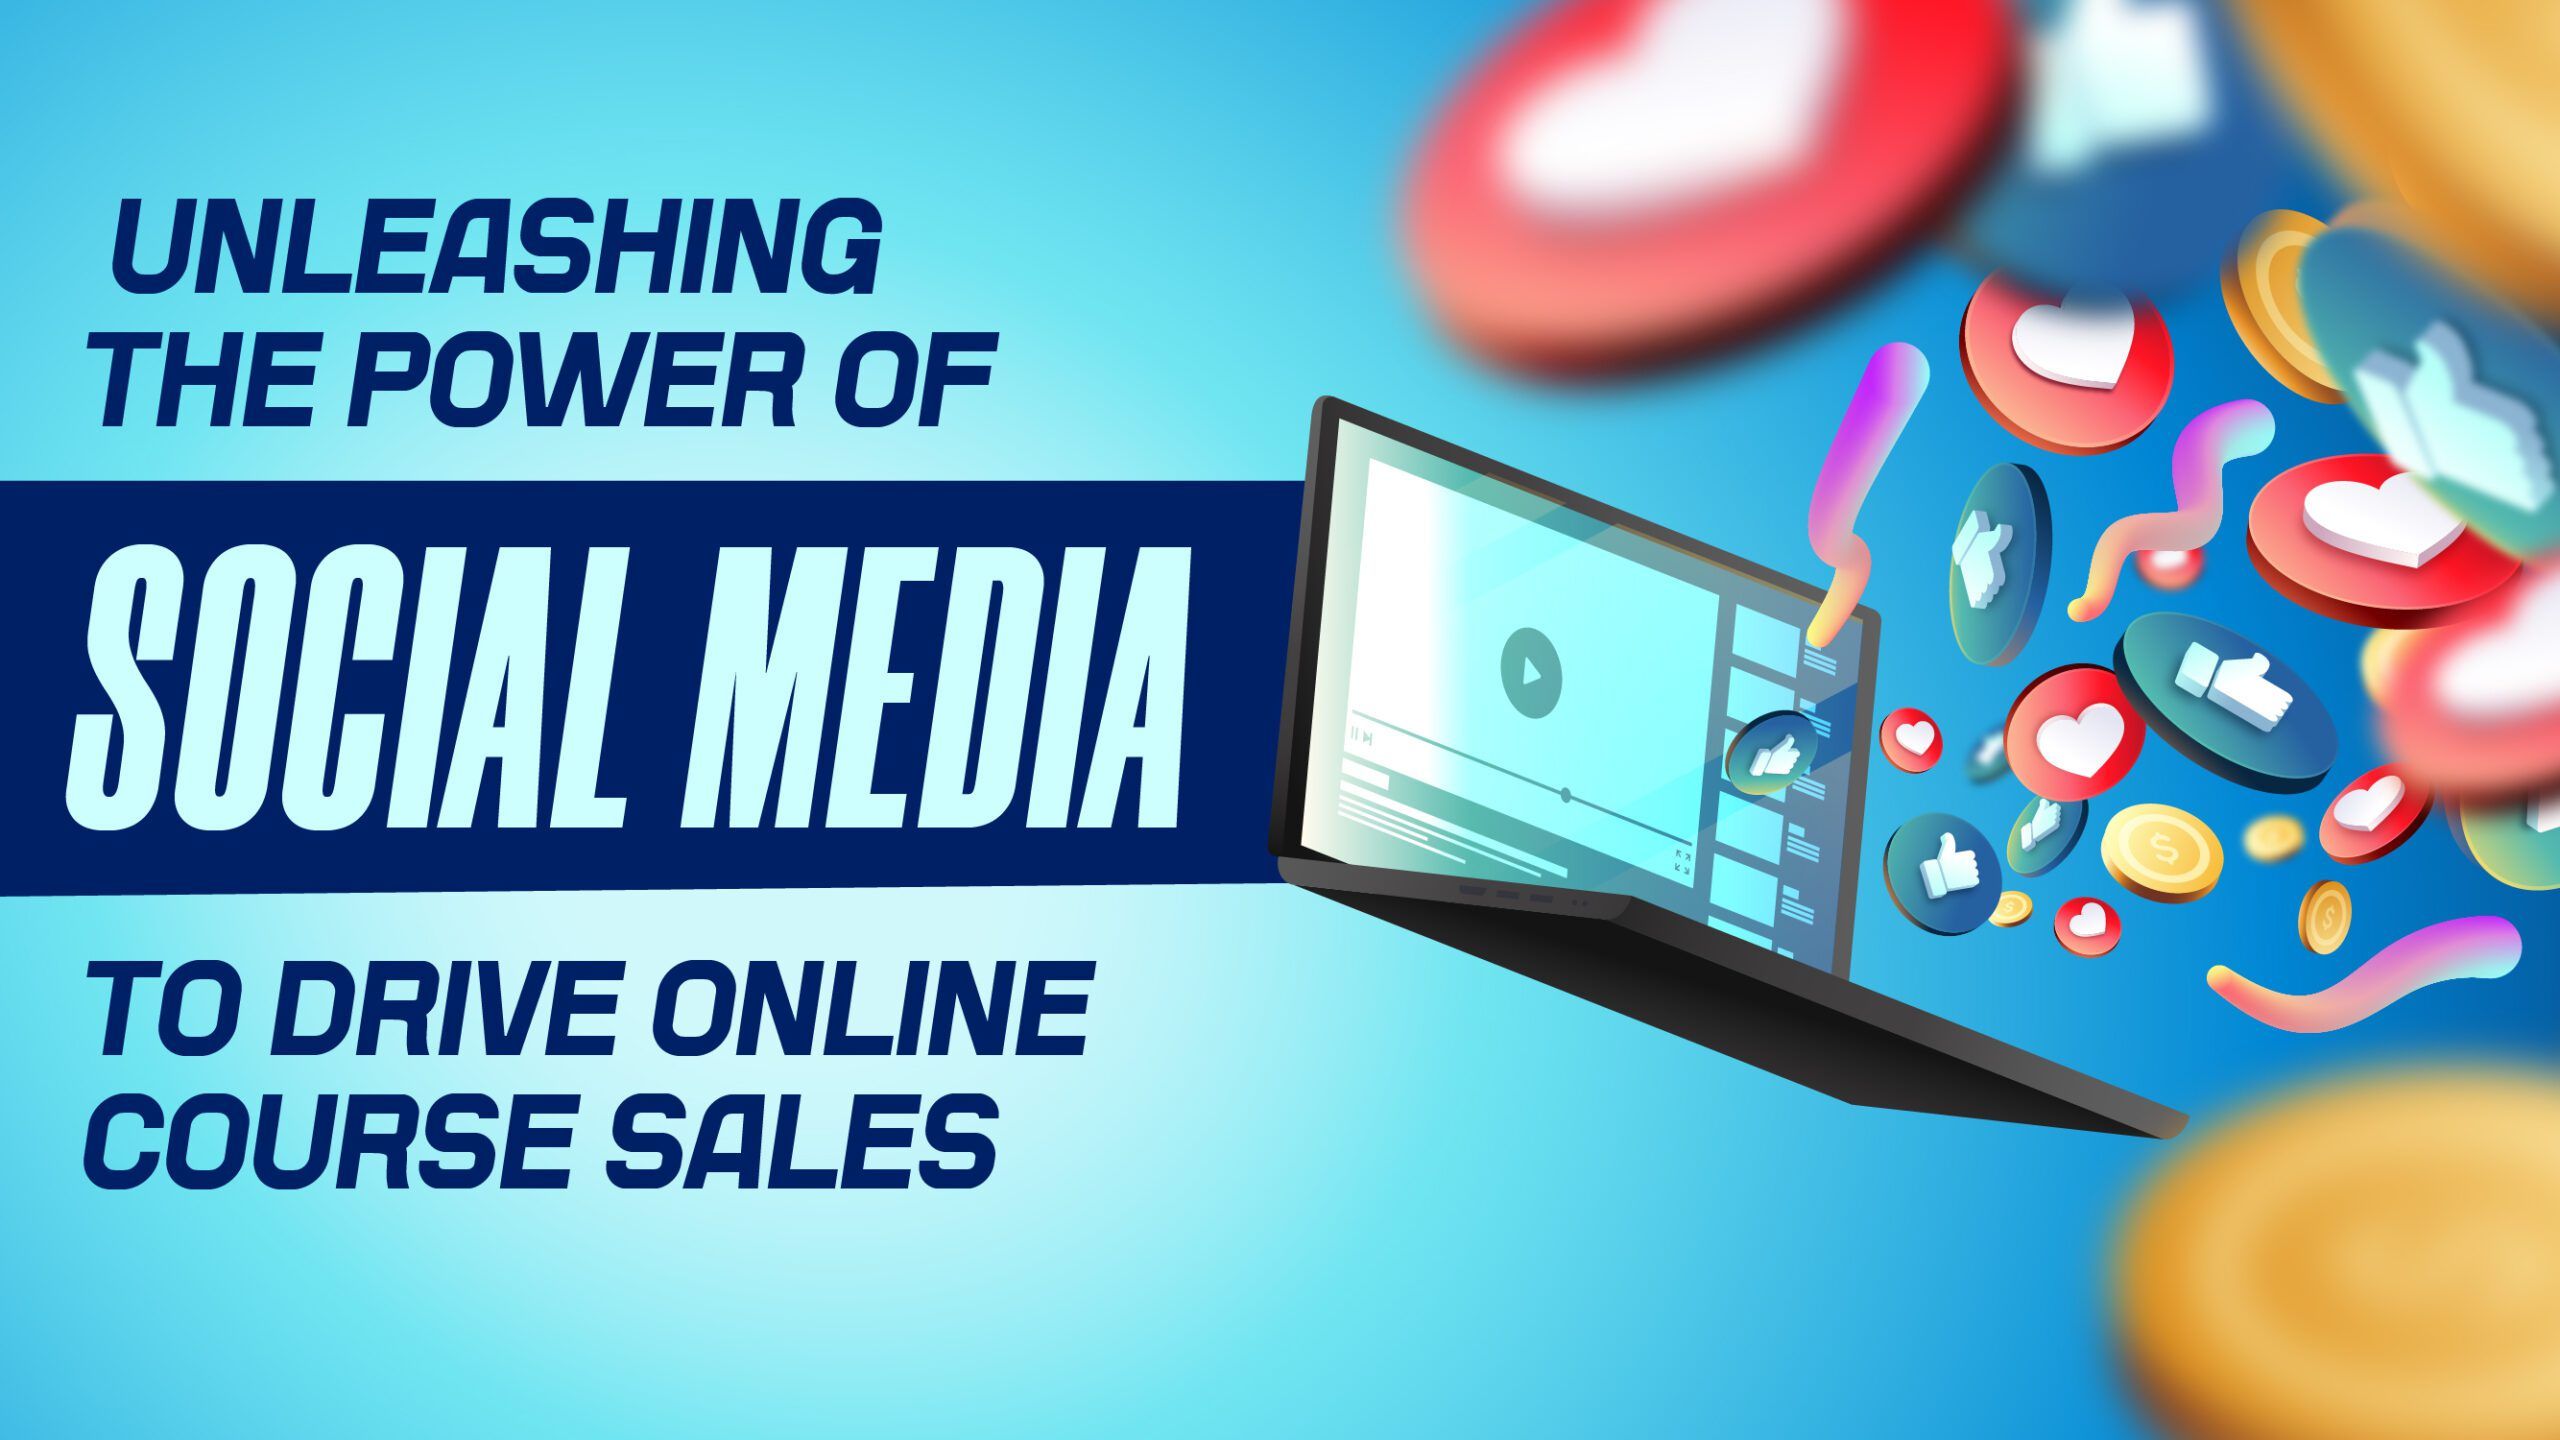 Unleashing the Power of Social Media to Drive Online Course Sales